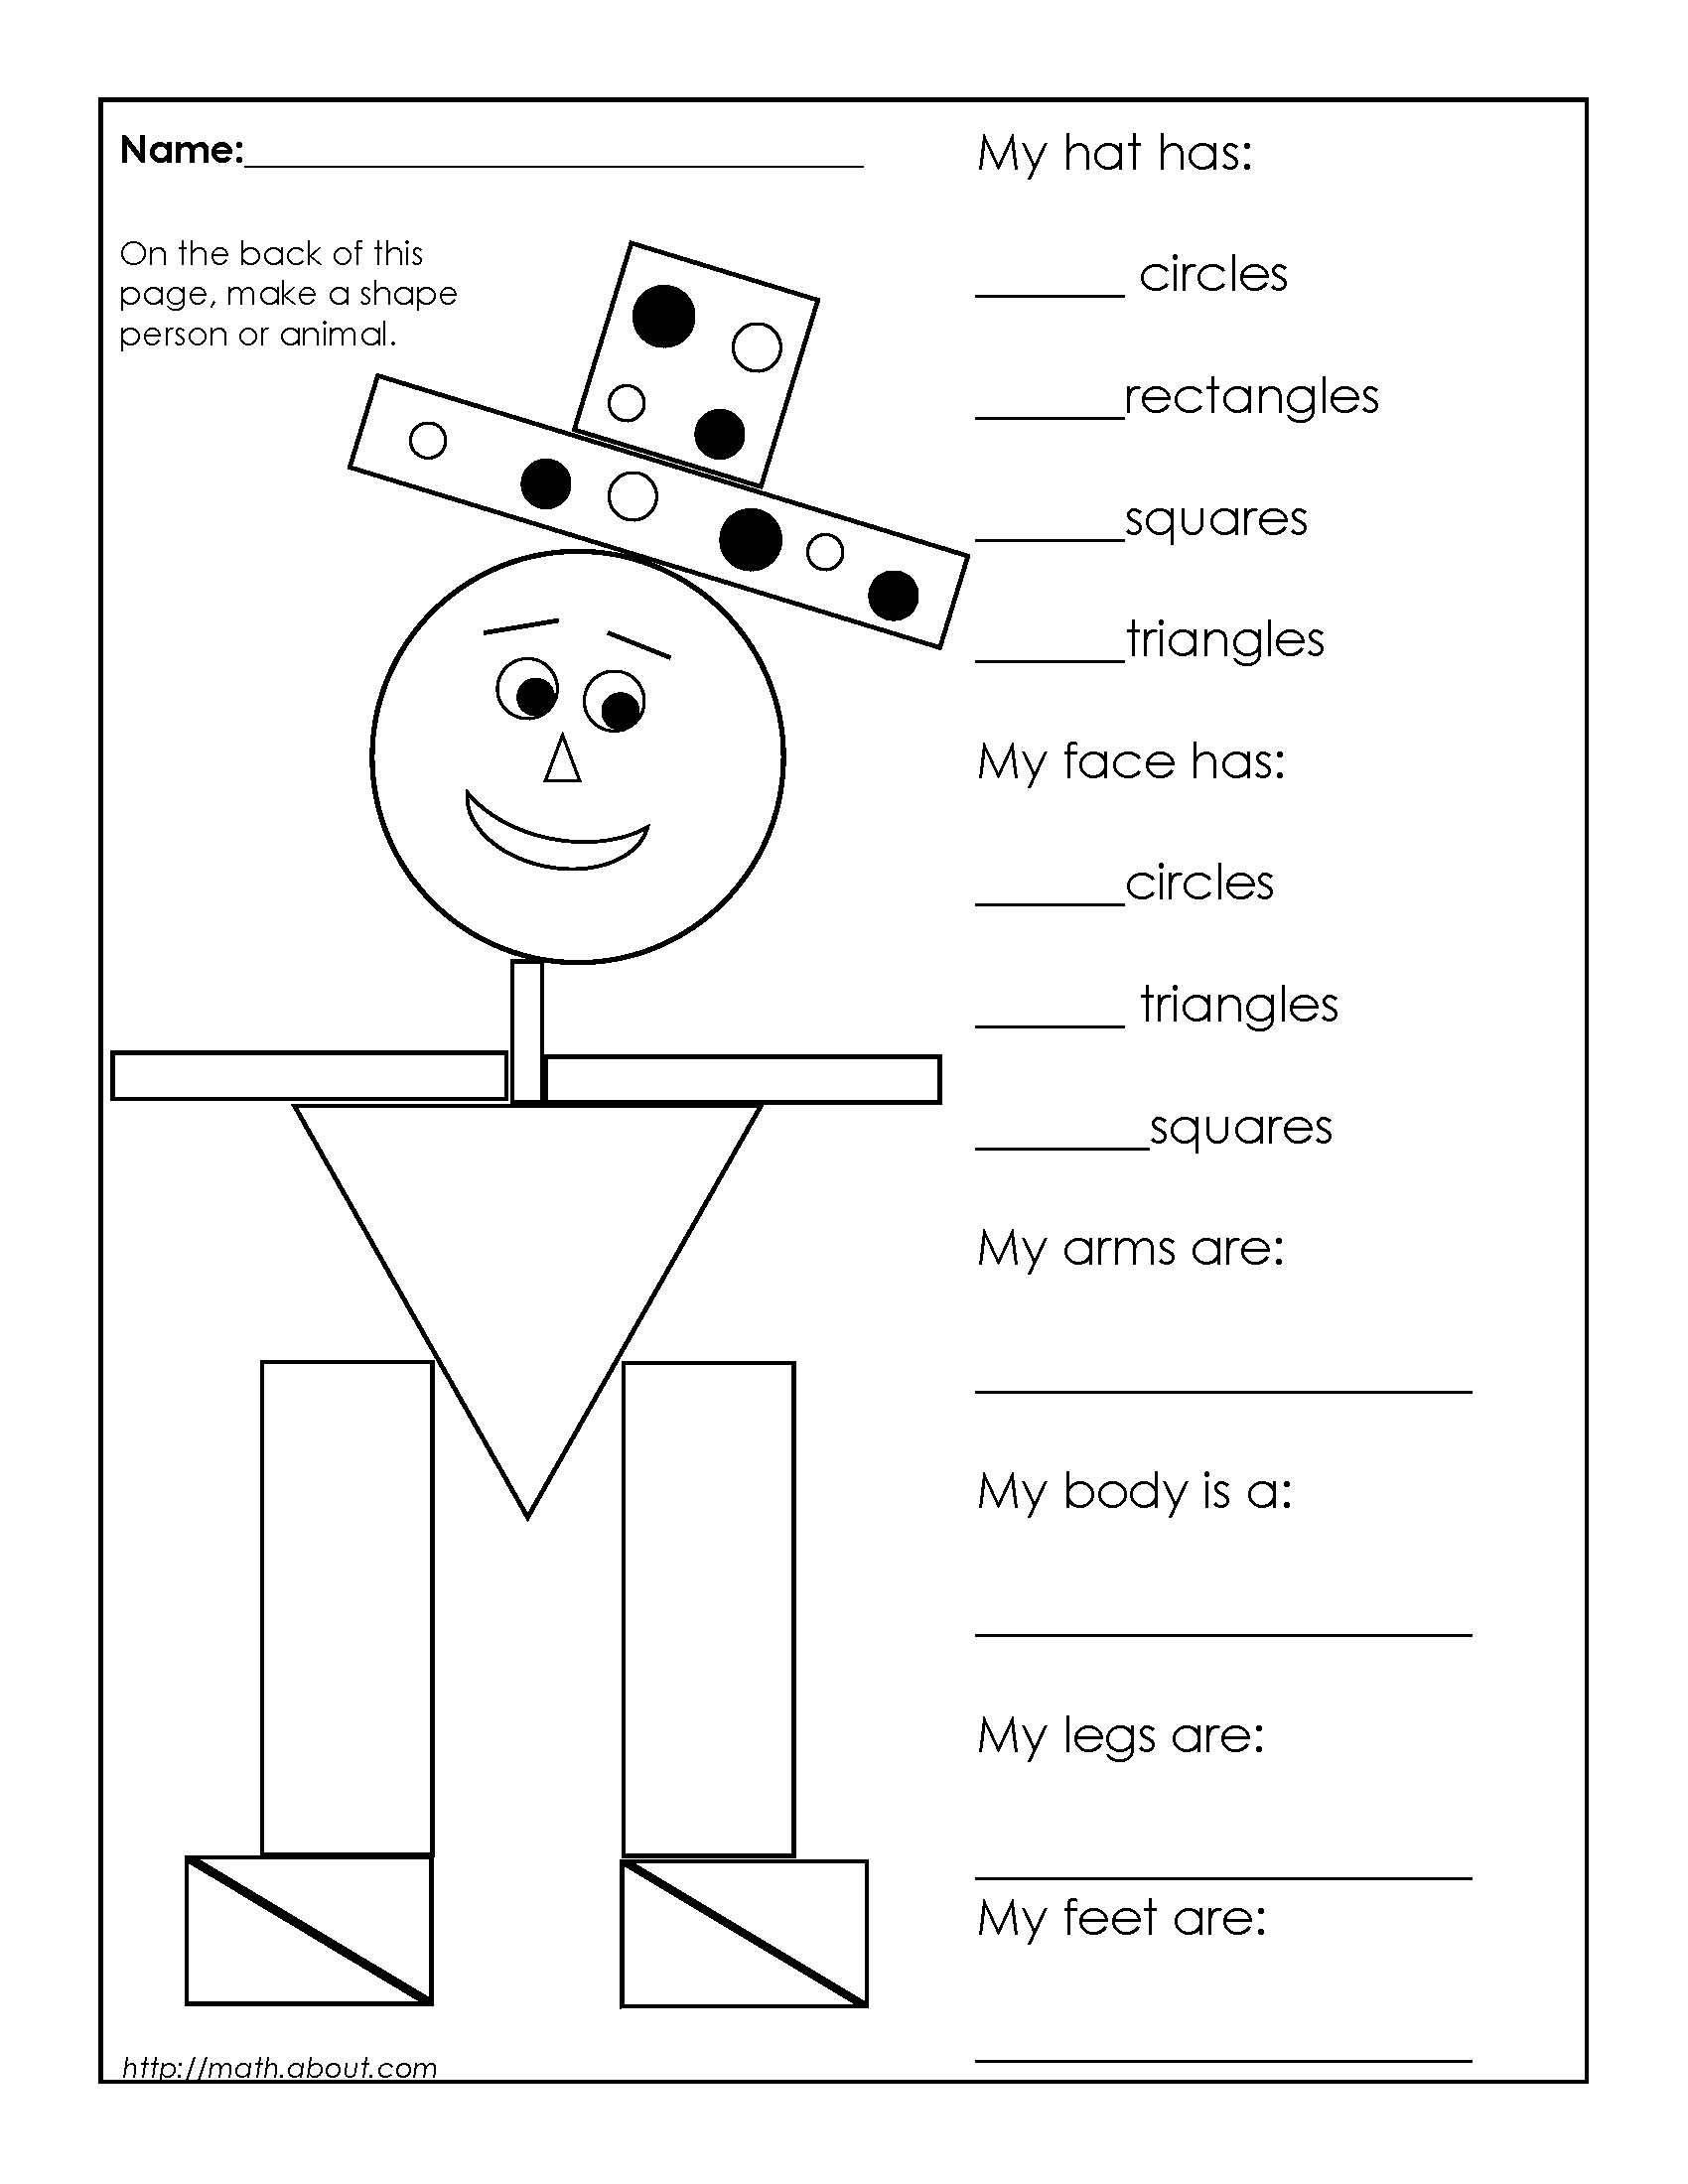 Geometric Shapes Worksheet 2nd Grade 1st Grade Geometry Worksheets for Students with Images